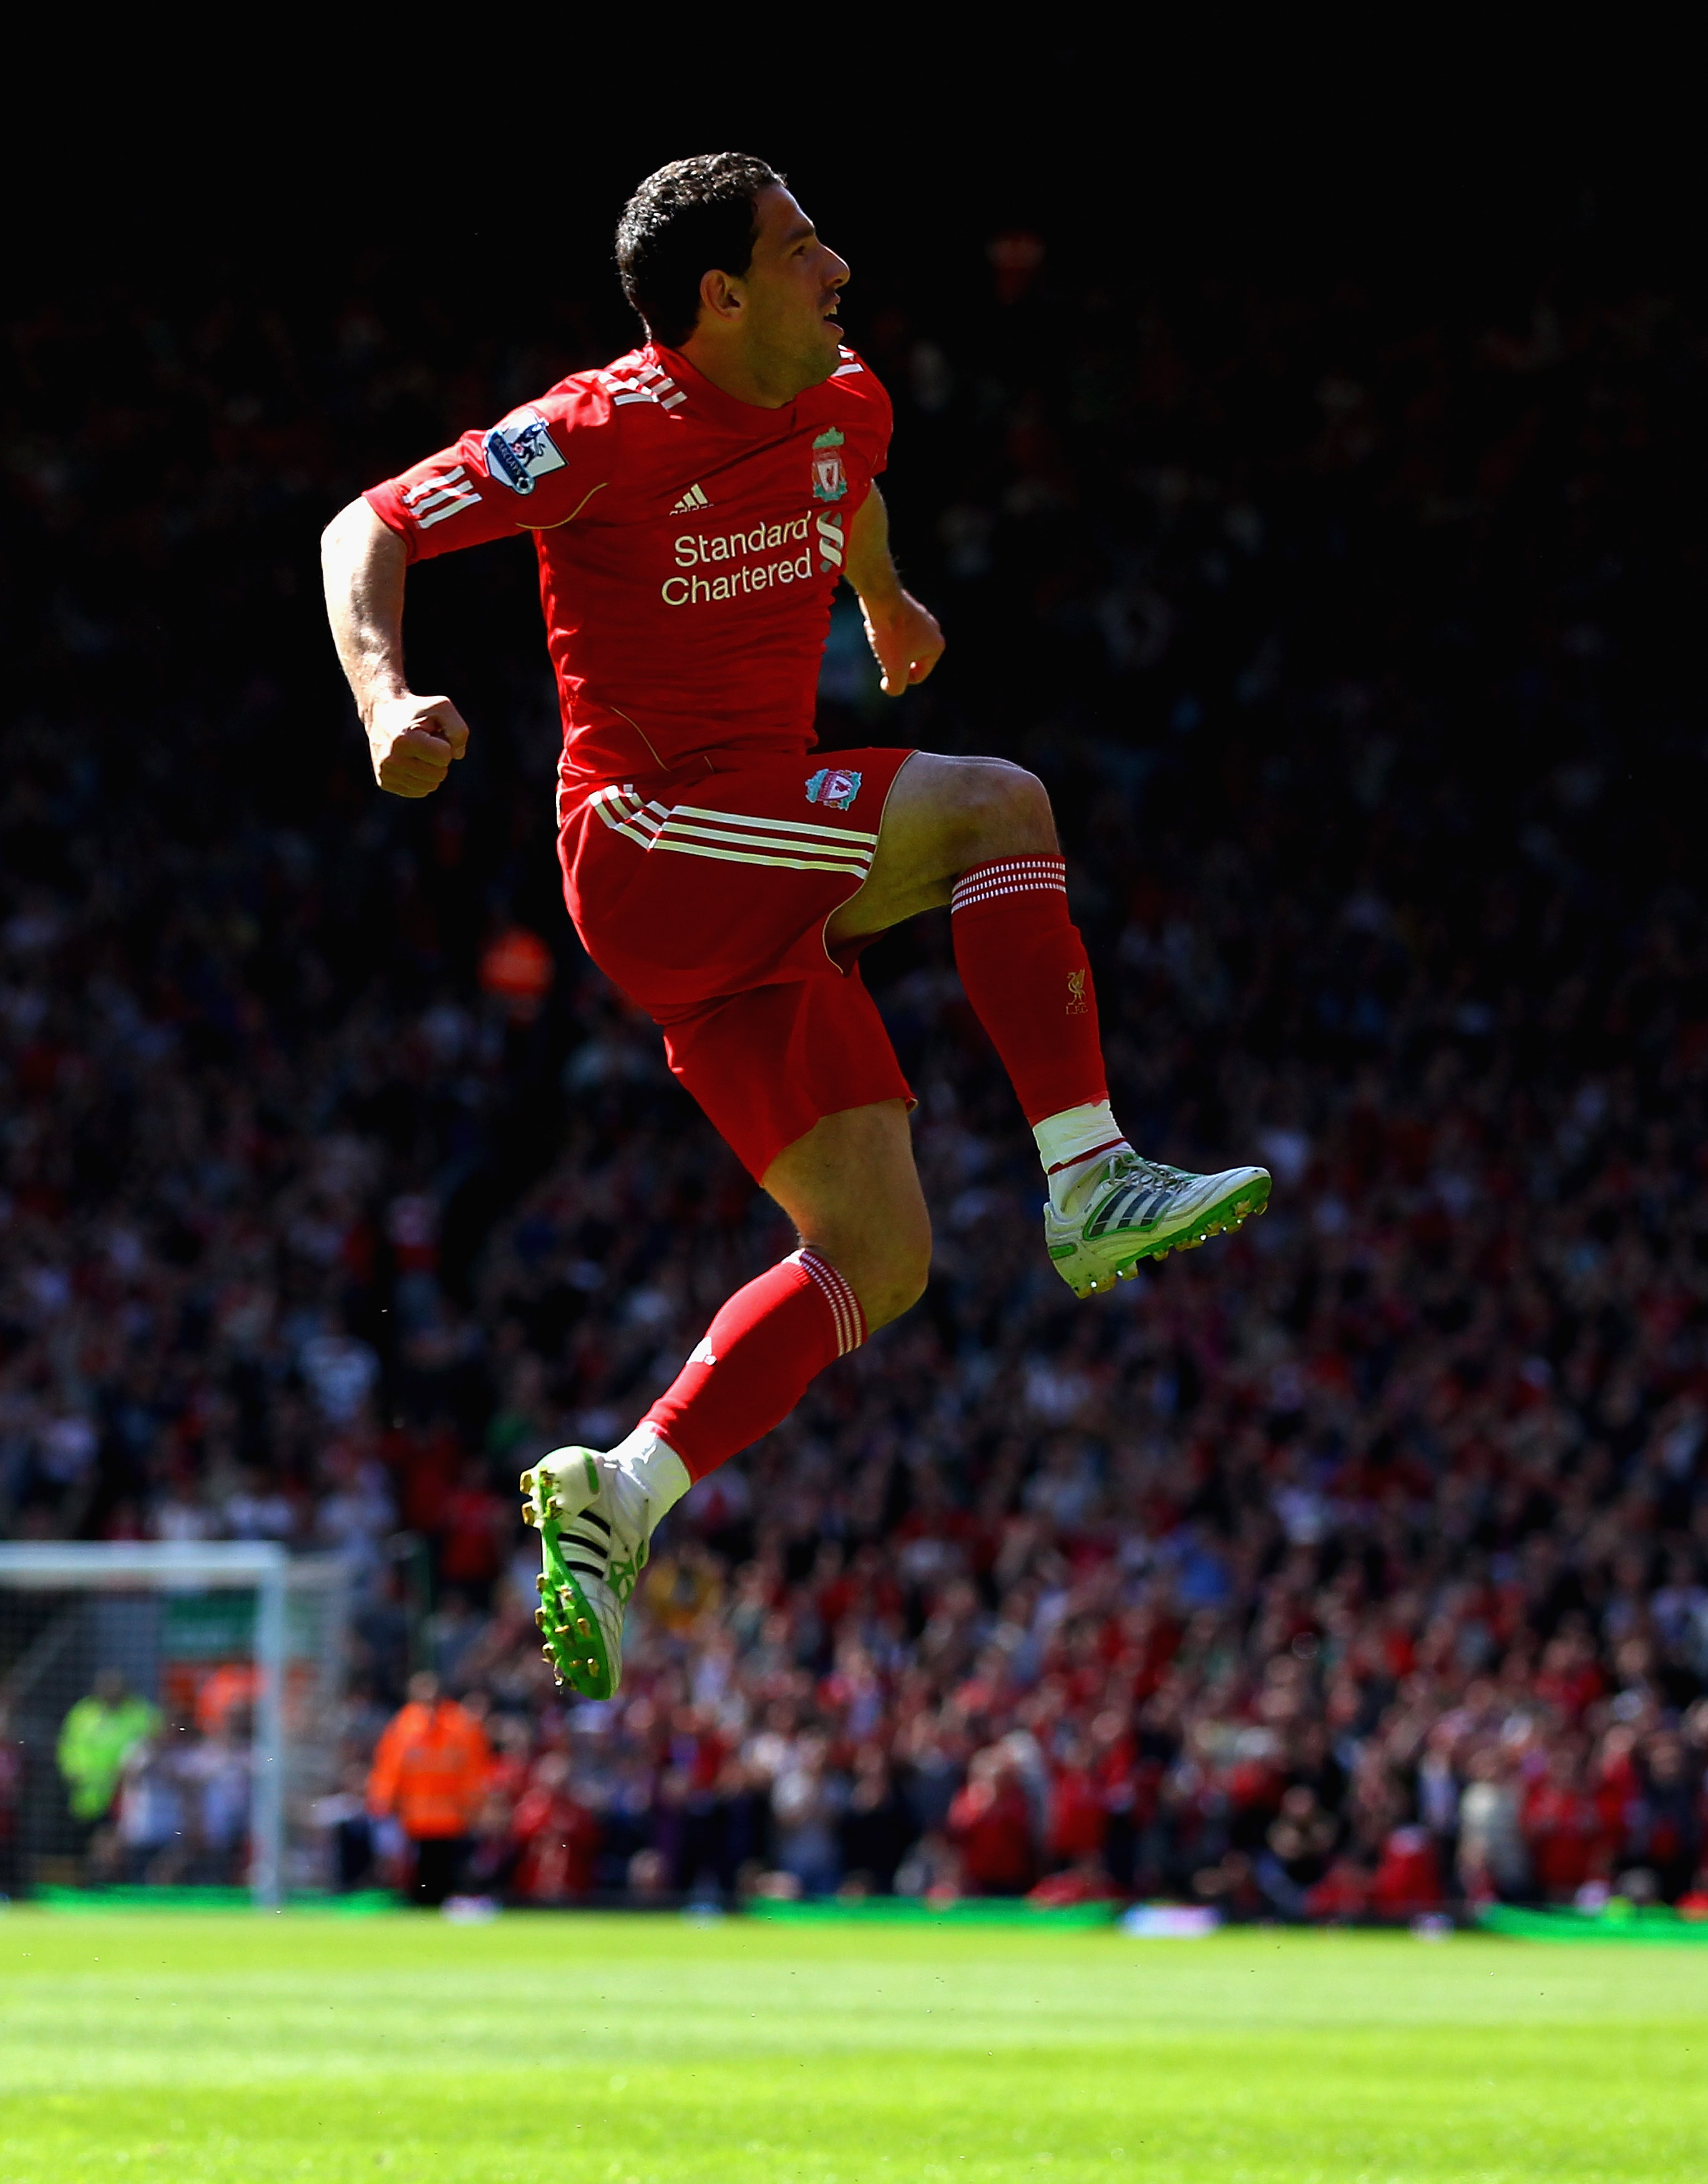 LIVERPOOL, ENGLAND - MAY 01:  Maxi Rodriguez of Liverpool leaps into the air to celebrate after scoring the first goal during the Barclays Premier League match between Liverpool  and Newcastle United at Anfield on May 1, 2011 in Liverpool, England.  (Phot